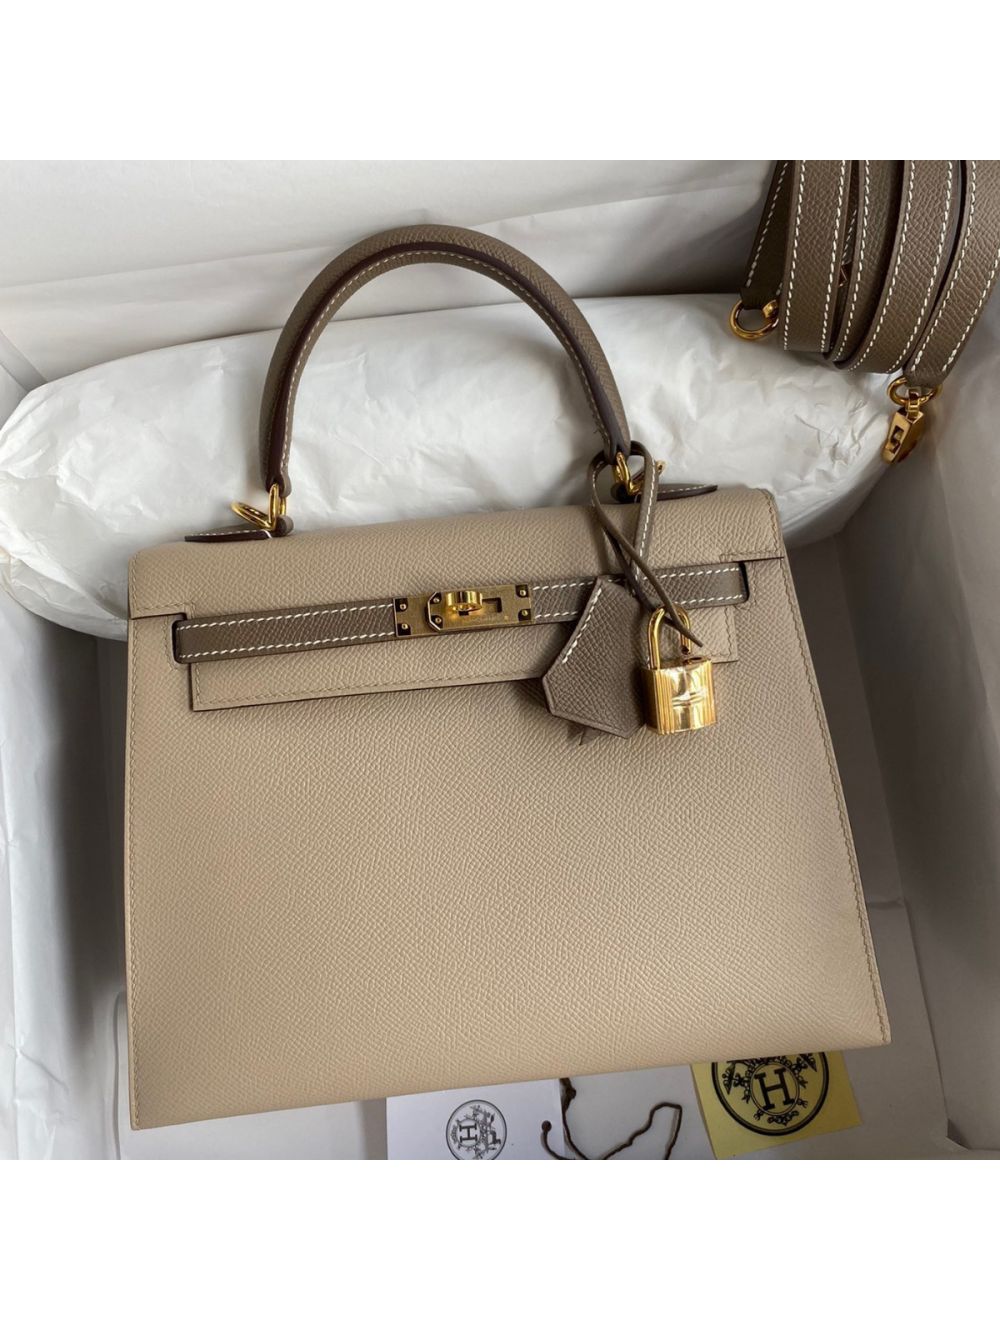 Replica Hermes Kelly Sellier 25 Bicolor Bag in Trench and Taupe